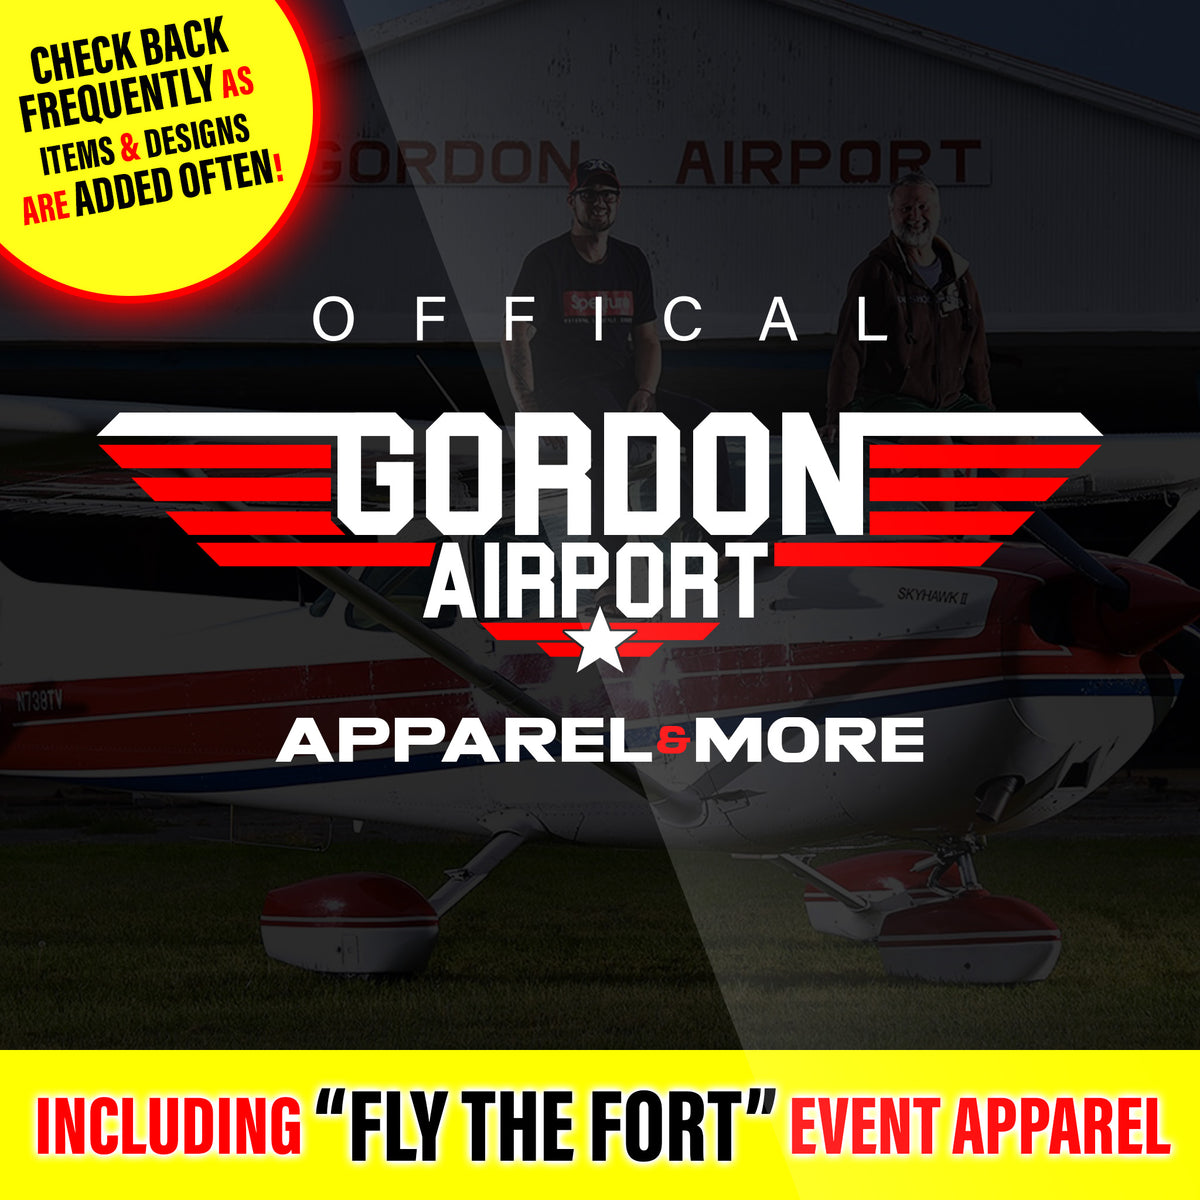 Gordon Airport Apparel & More Page 3 Øfficial X INK Støre